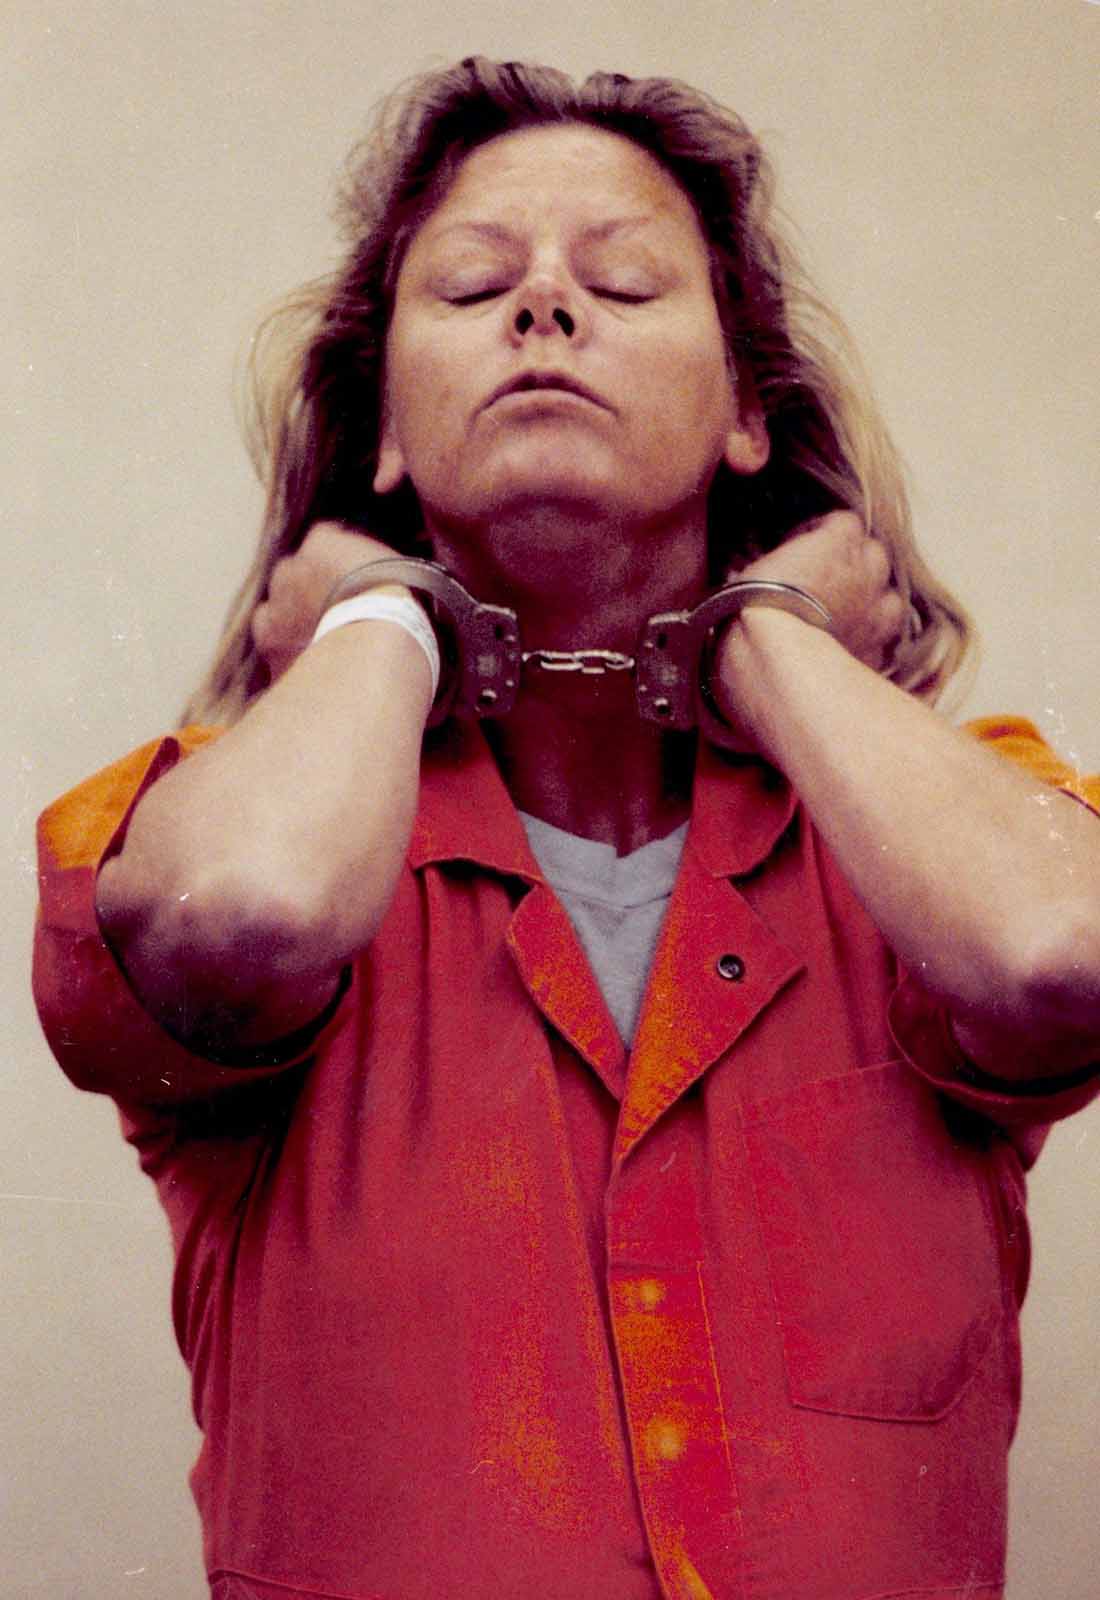 Aileen Wuornos claims the seven murders she committed was in self-defense. Yet she was still given six death penalties. Why?